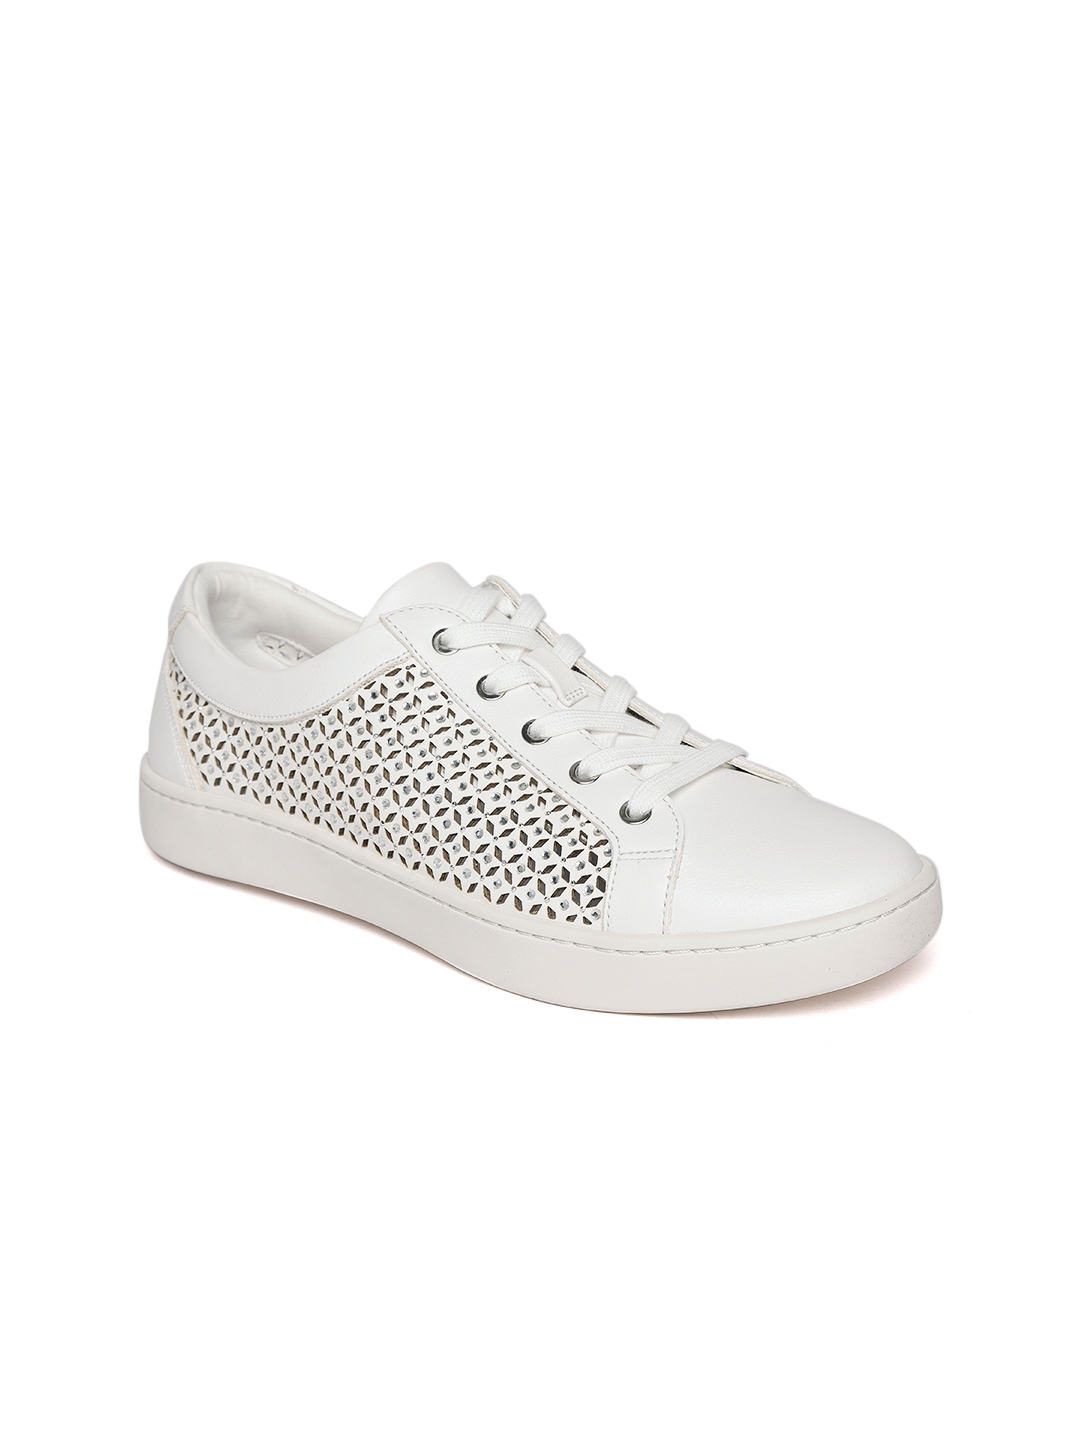 Buy ALDO Women White Sneakers With Laser Cuts - Casual Shoes for Women ...